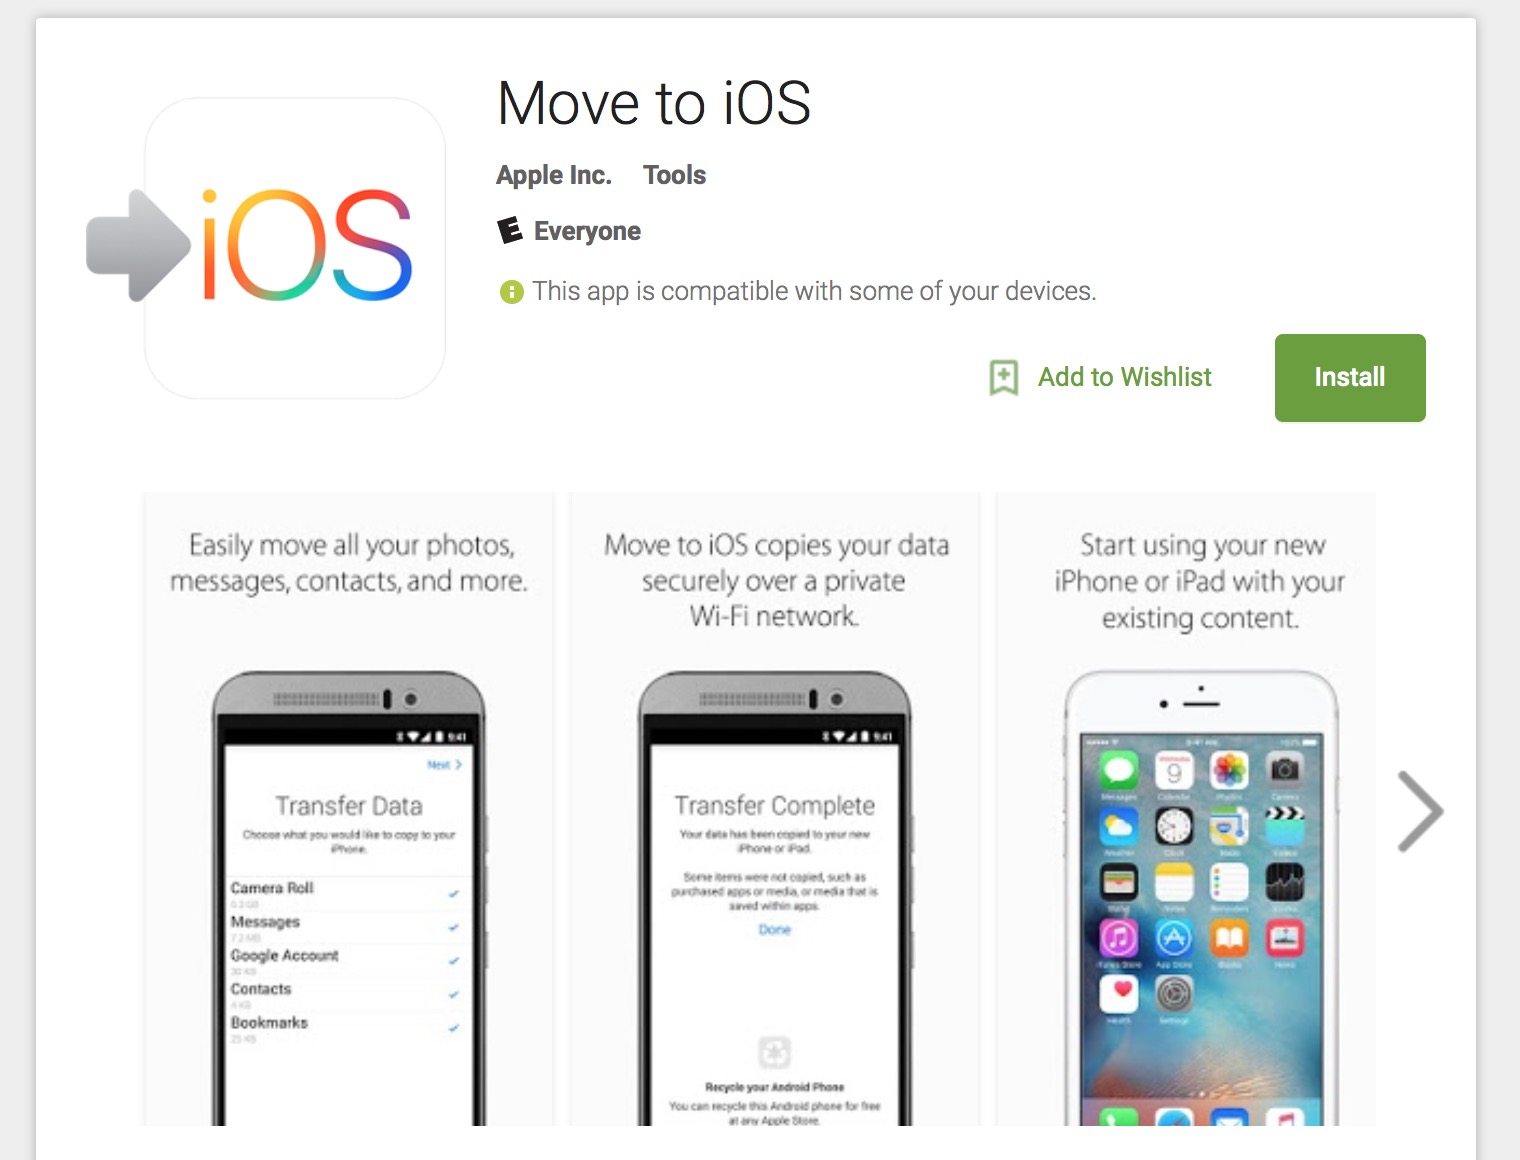 apple-makes-its-first-android-app-move-to-ios-image-cultofandroidcomwp-contentuploads201509Move-to-iOS-jpg